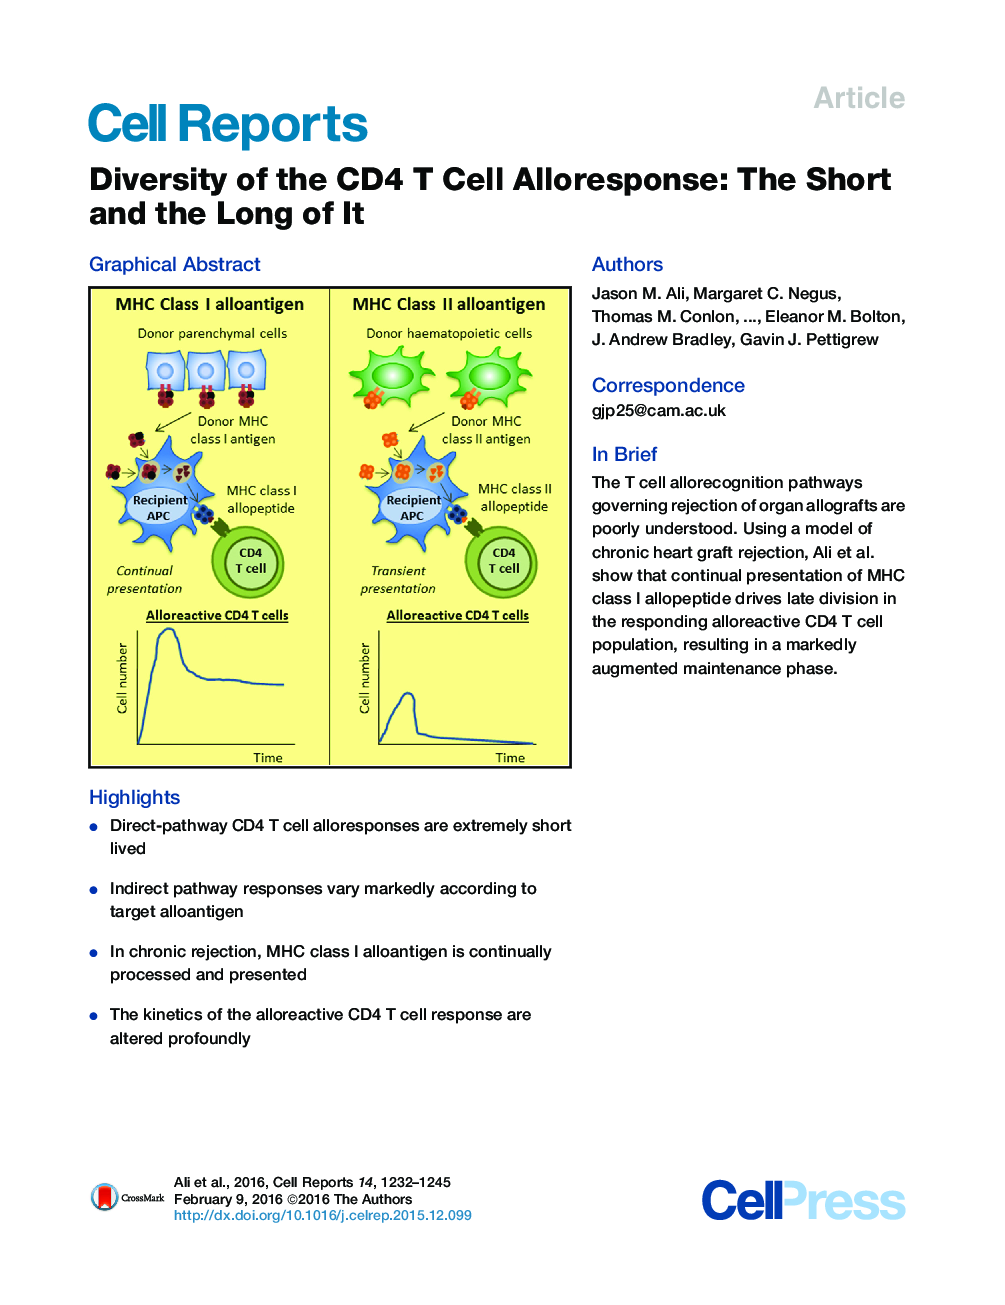 Diversity of the CD4 T Cell Alloresponse: The Short and the Long of It 